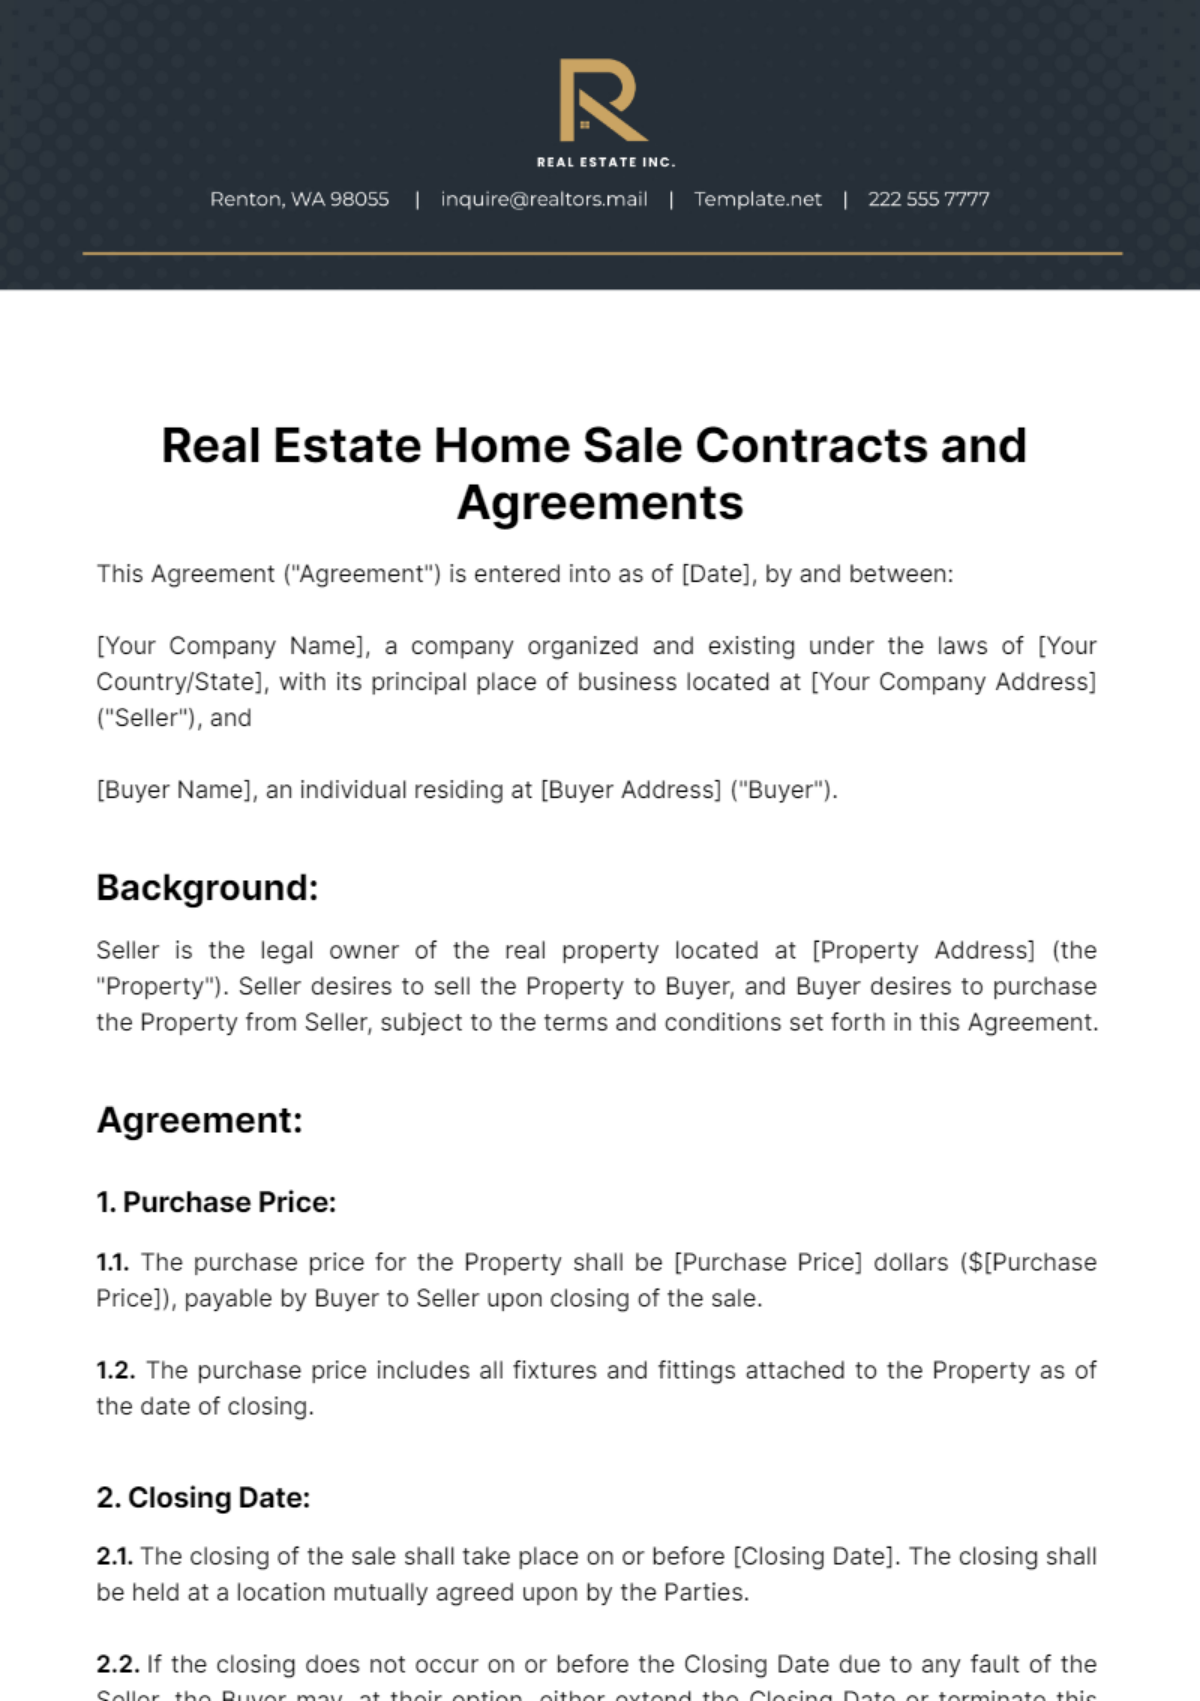 Real Estate Home Sale Contracts and Agreements Template